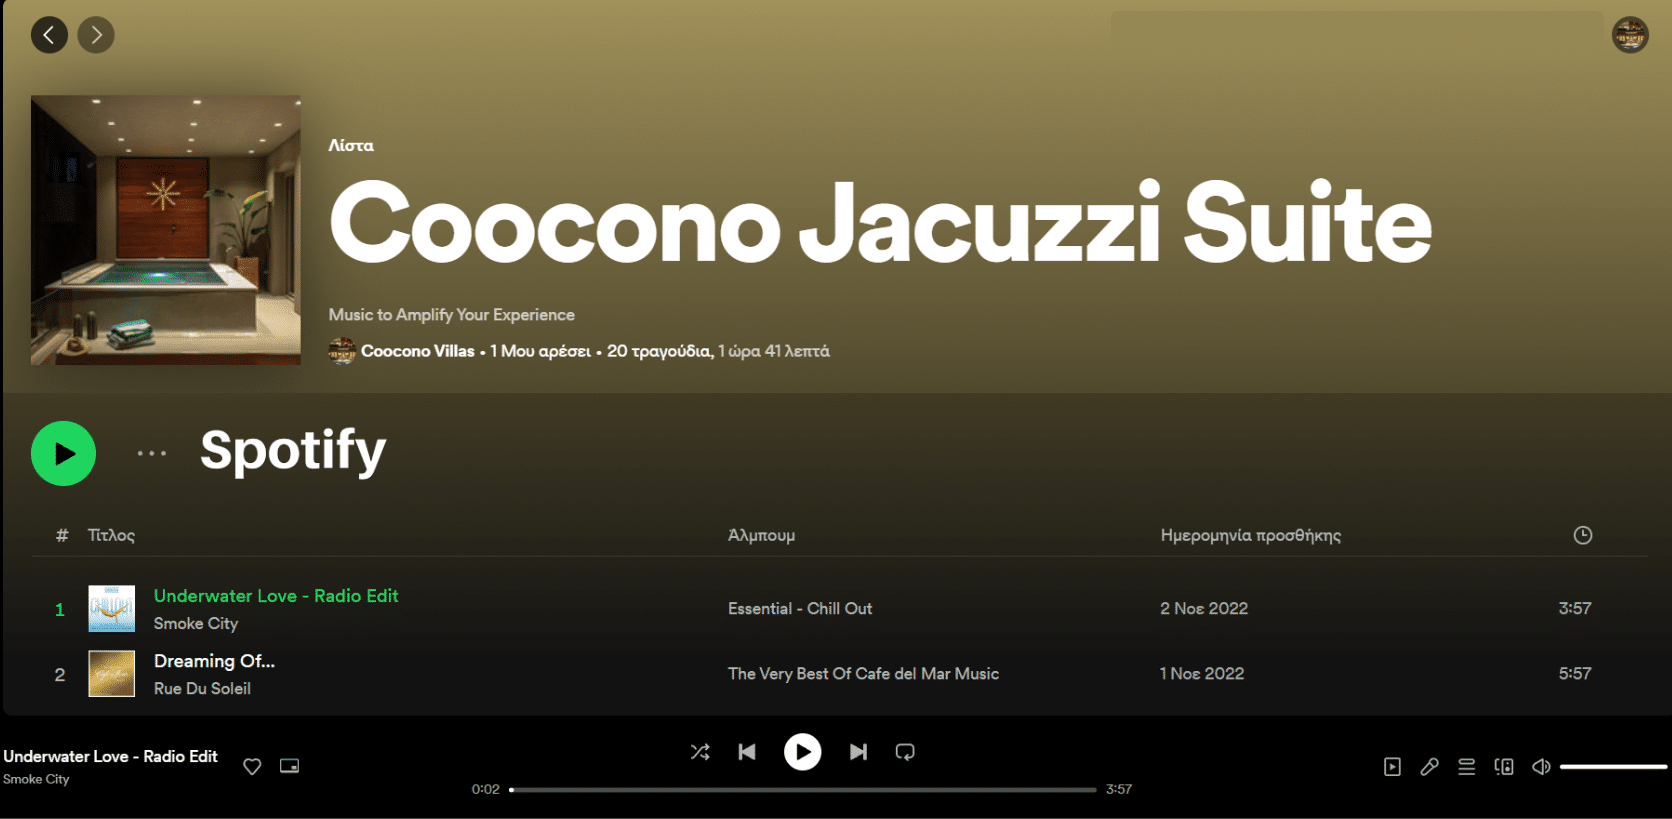 Coocono Spotify Compilation for the Jacuzzi  Suite